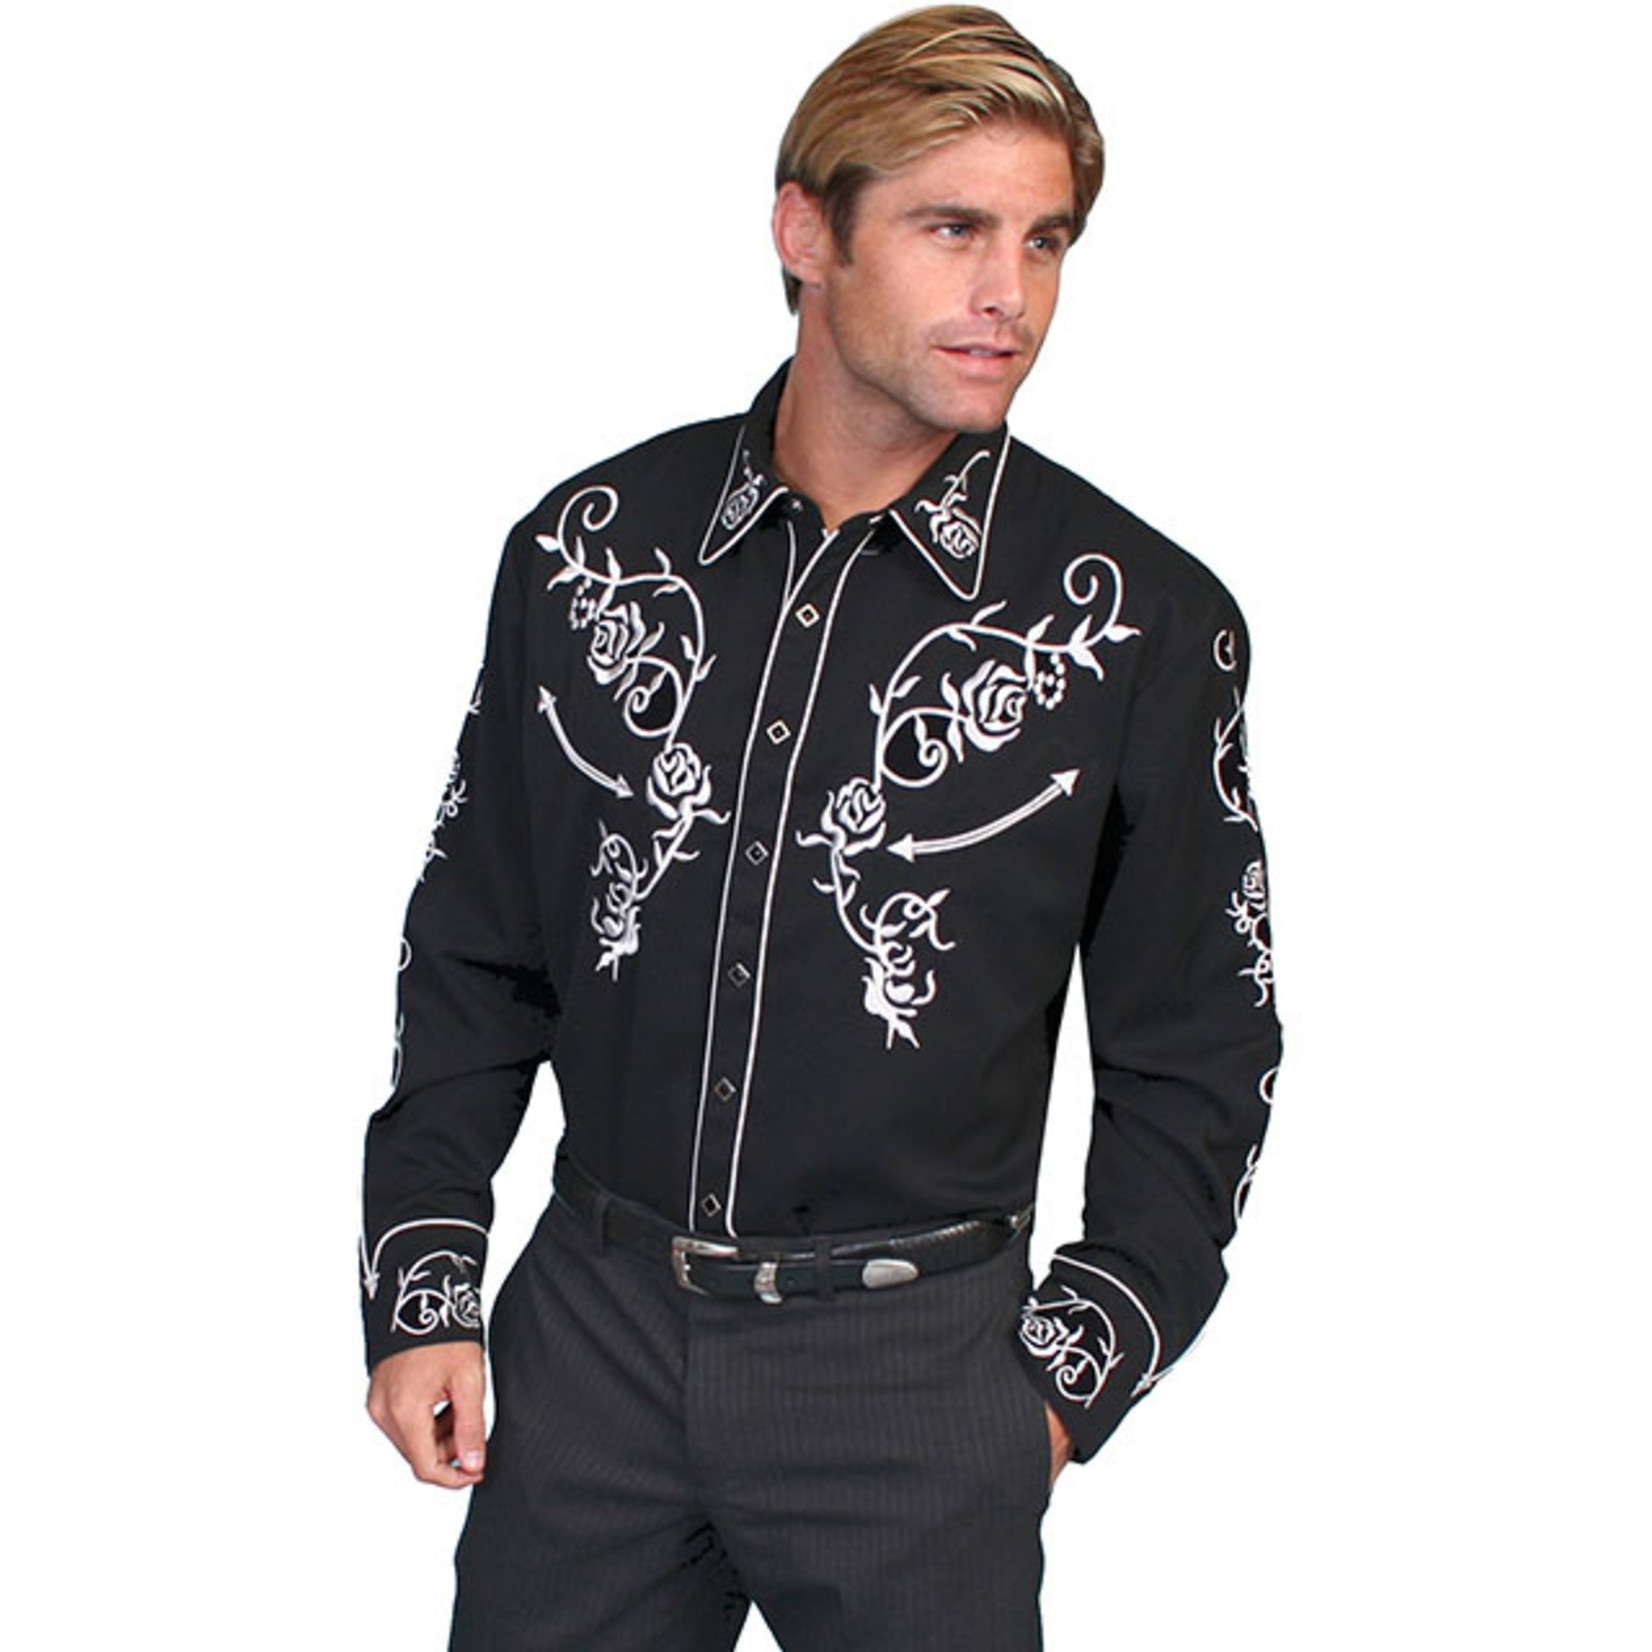 Men's Scully Jet Floral Embroidered Black & White P-706